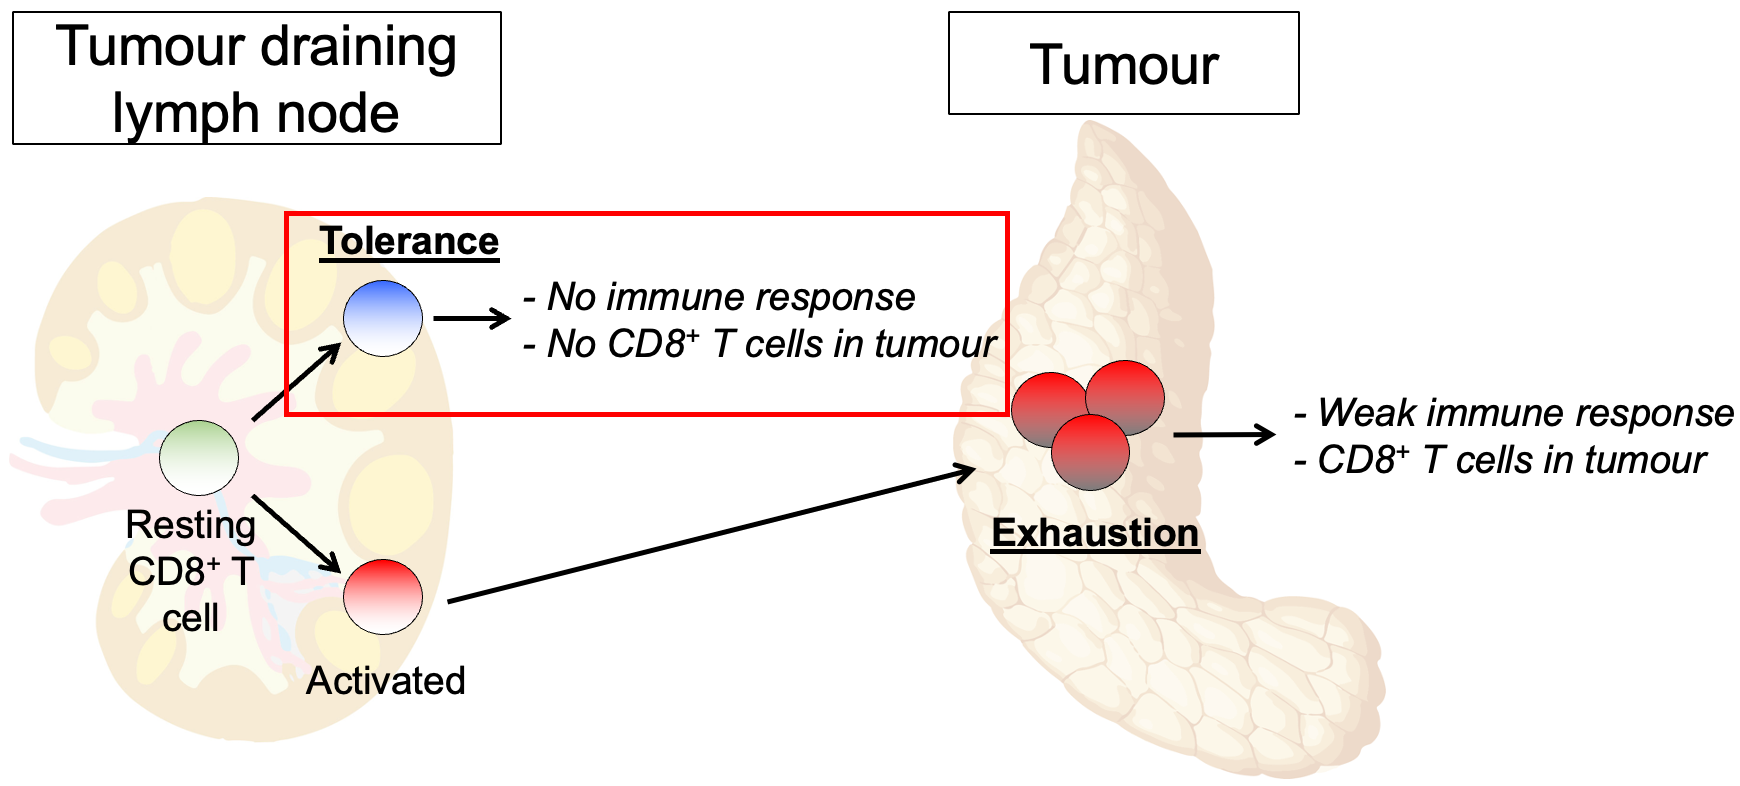 Restraint of anti-tumour T cell immunity by the tolerance and exhaustion regulatory checkpoints (Ian Parish lab)